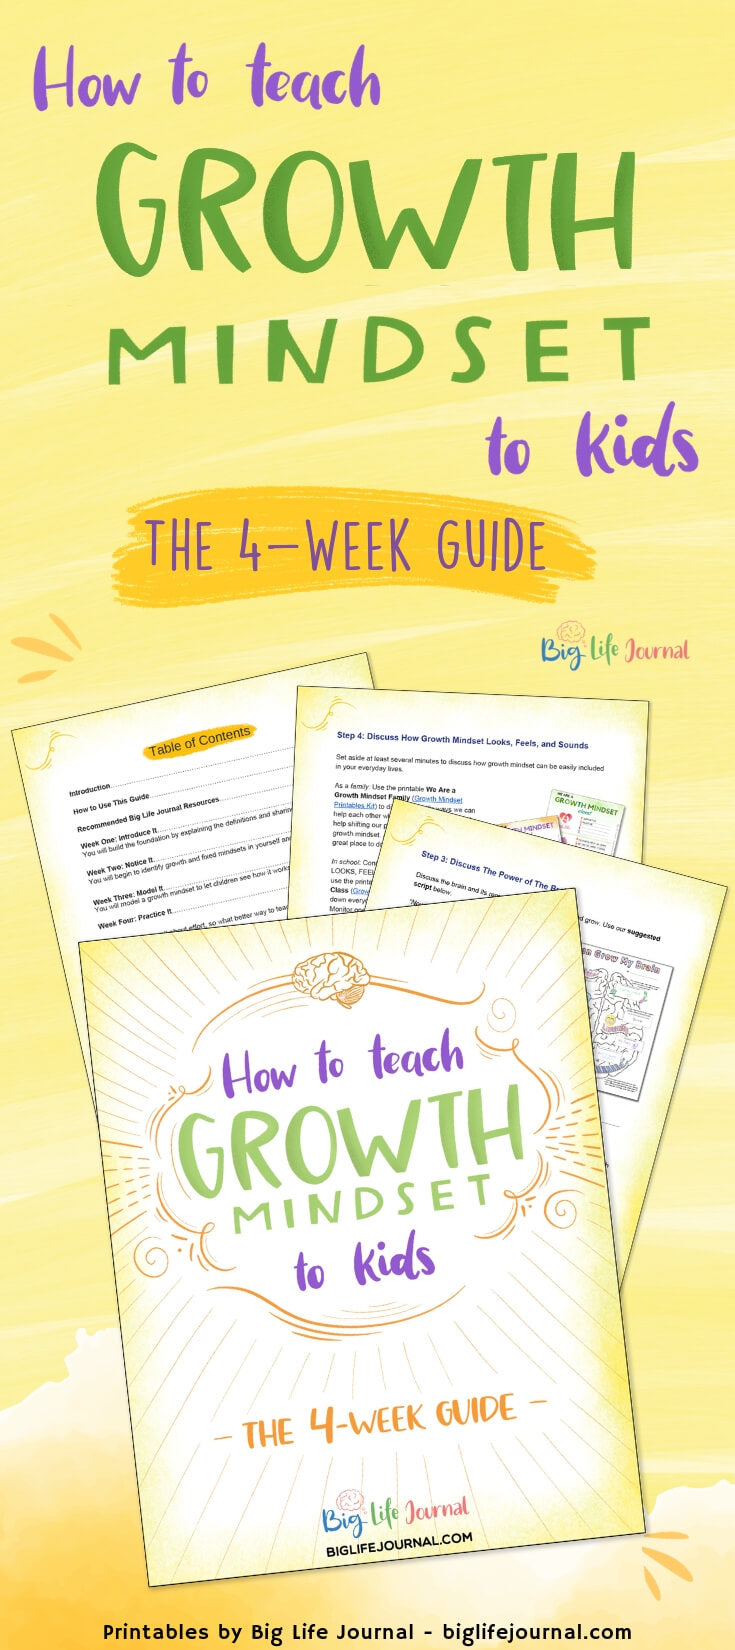 How To Teach Growth Mindset To Kids The 4 Week Guide Big Life Journal